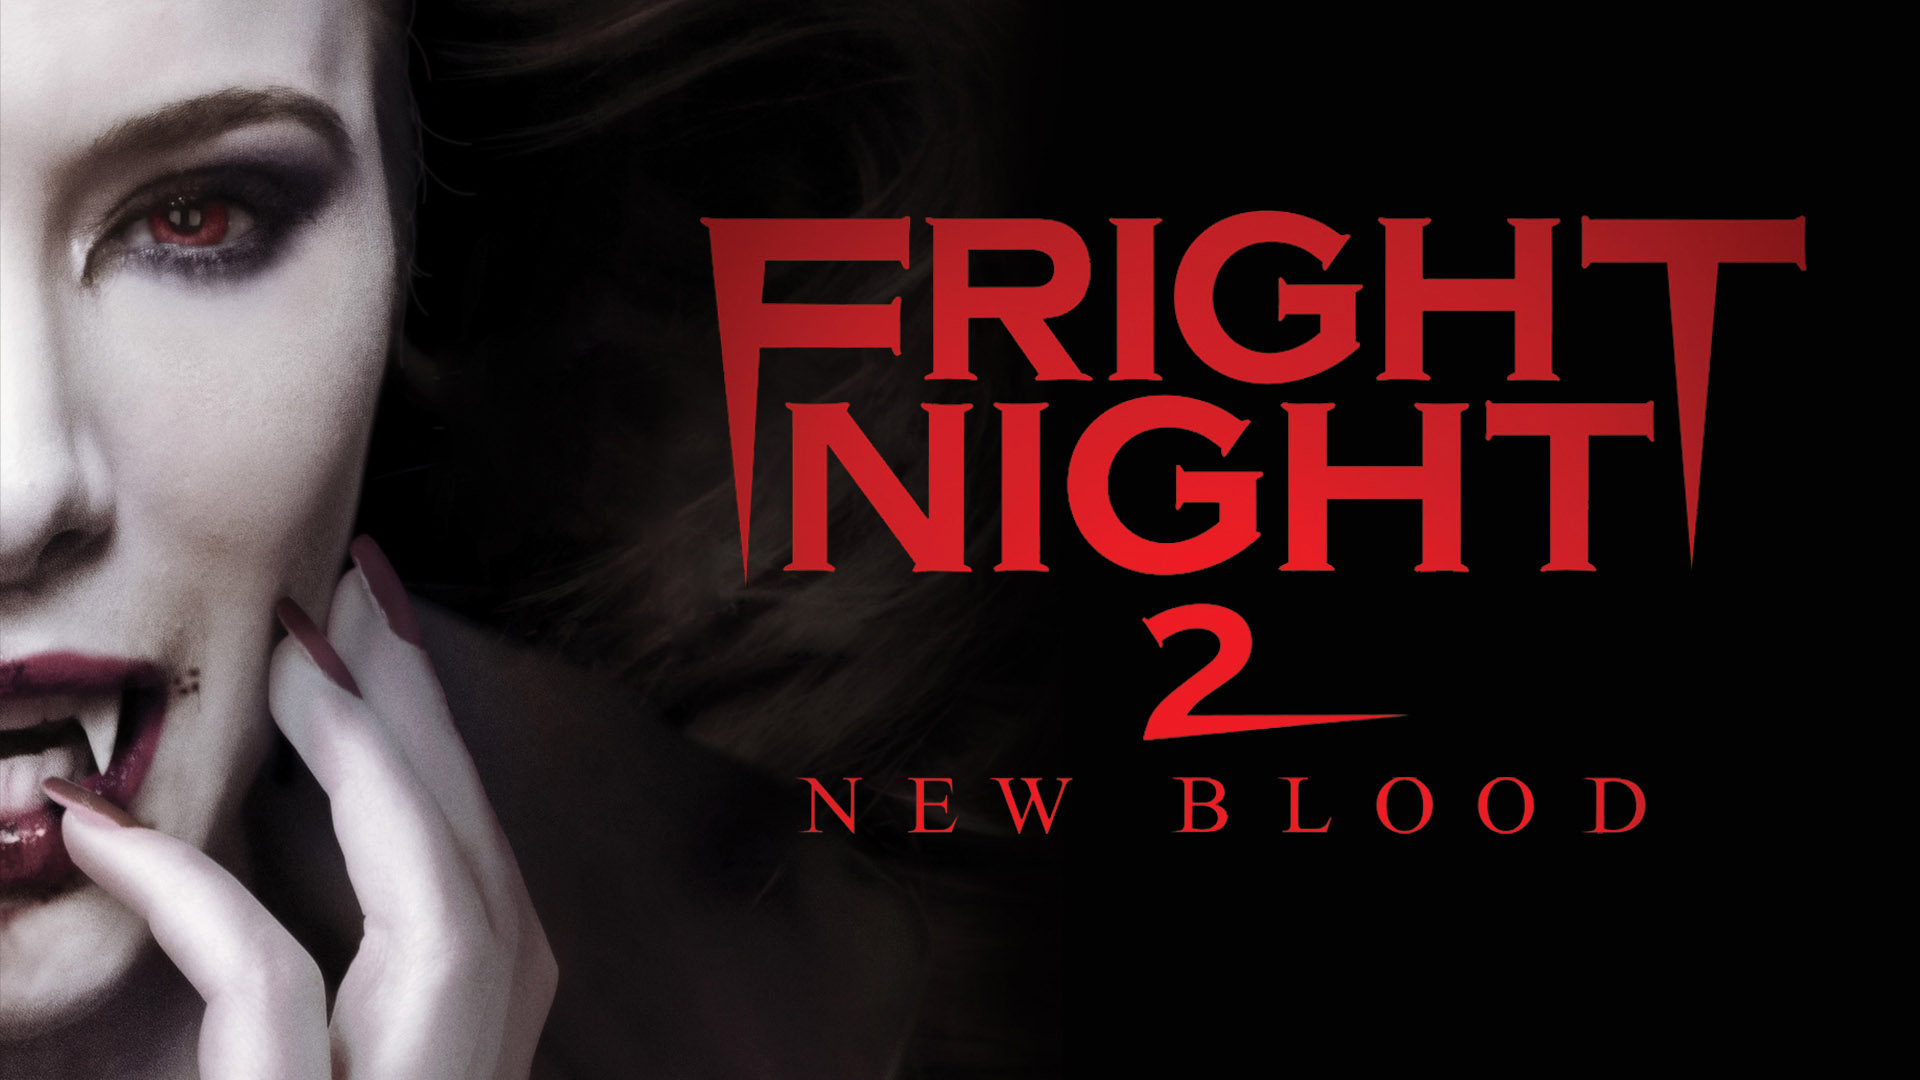 Fright Night 2: New Blood Wallpapers